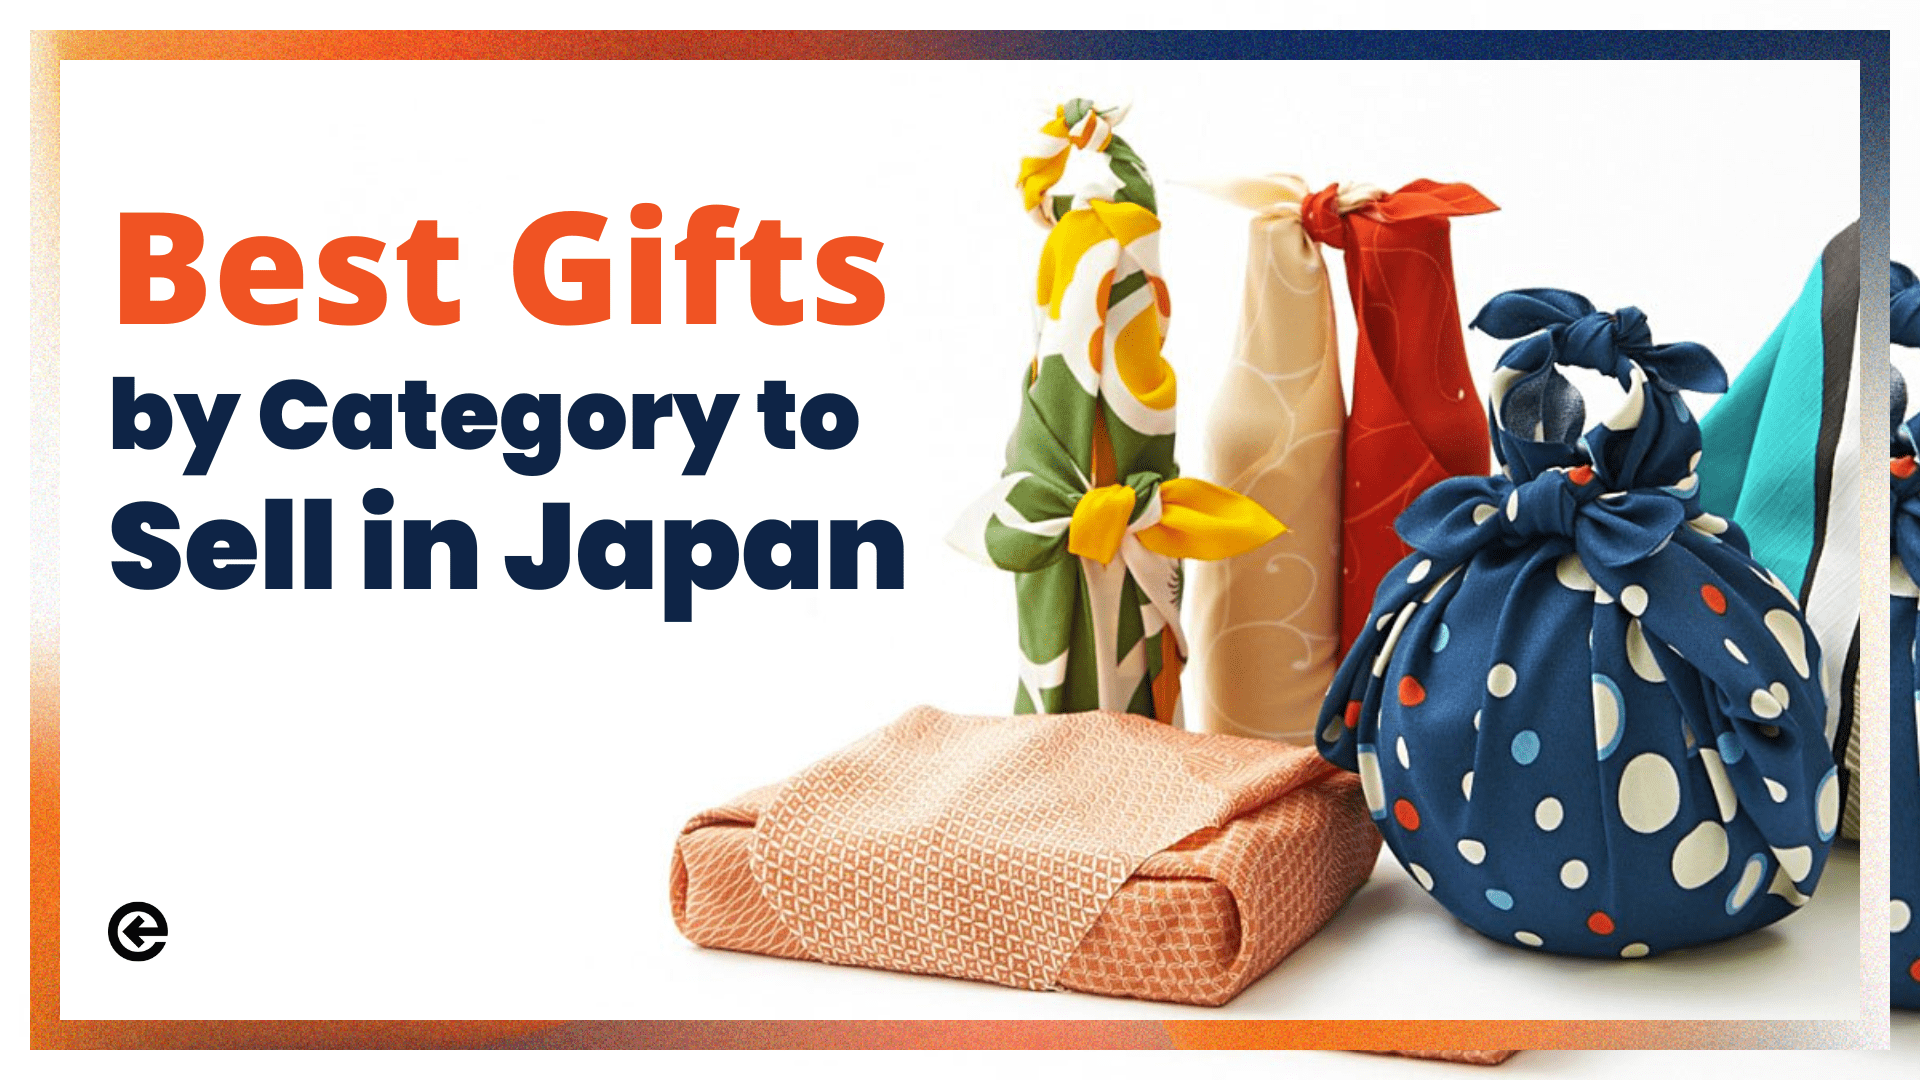 Best Gifts by Category to Sell in Japan